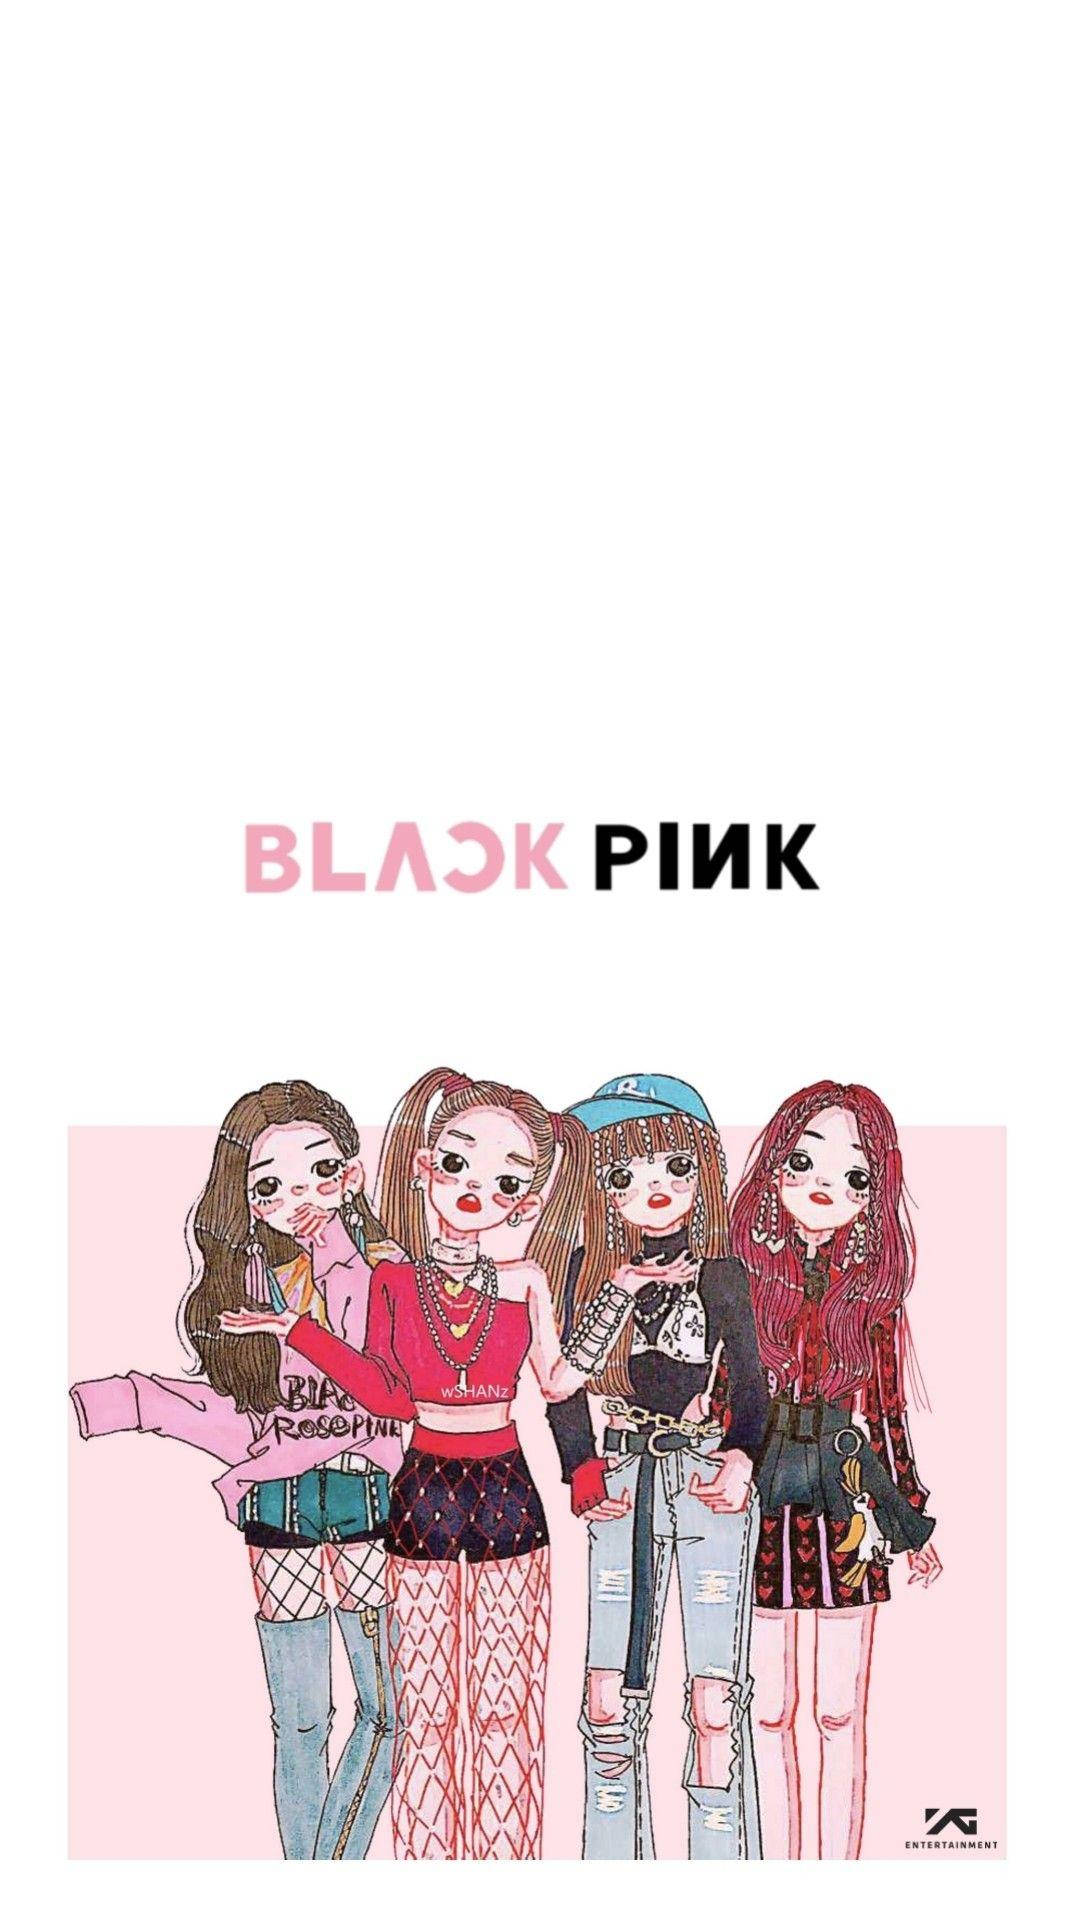 Download Blackpink Anime Girls In Grunge Outfits Wallpaper 